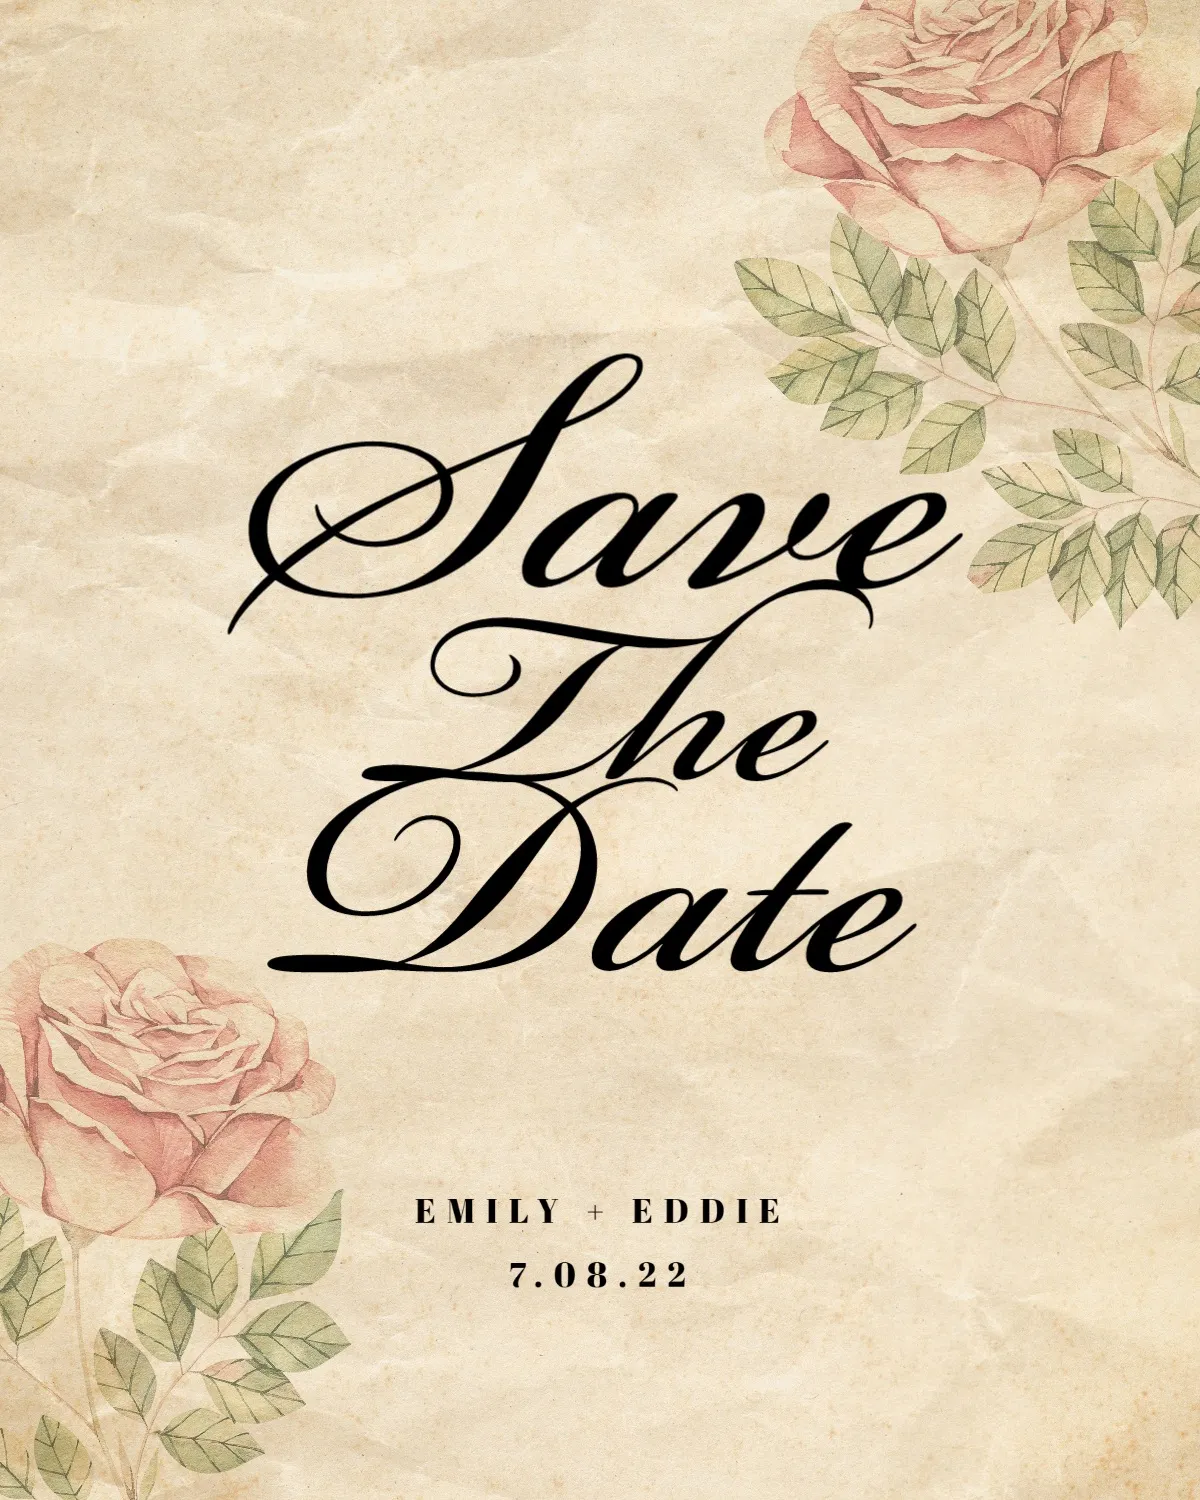 Free Save the Date Templates: Make Your Own Save the Date Cards With Free Save The Date Postcard Templates